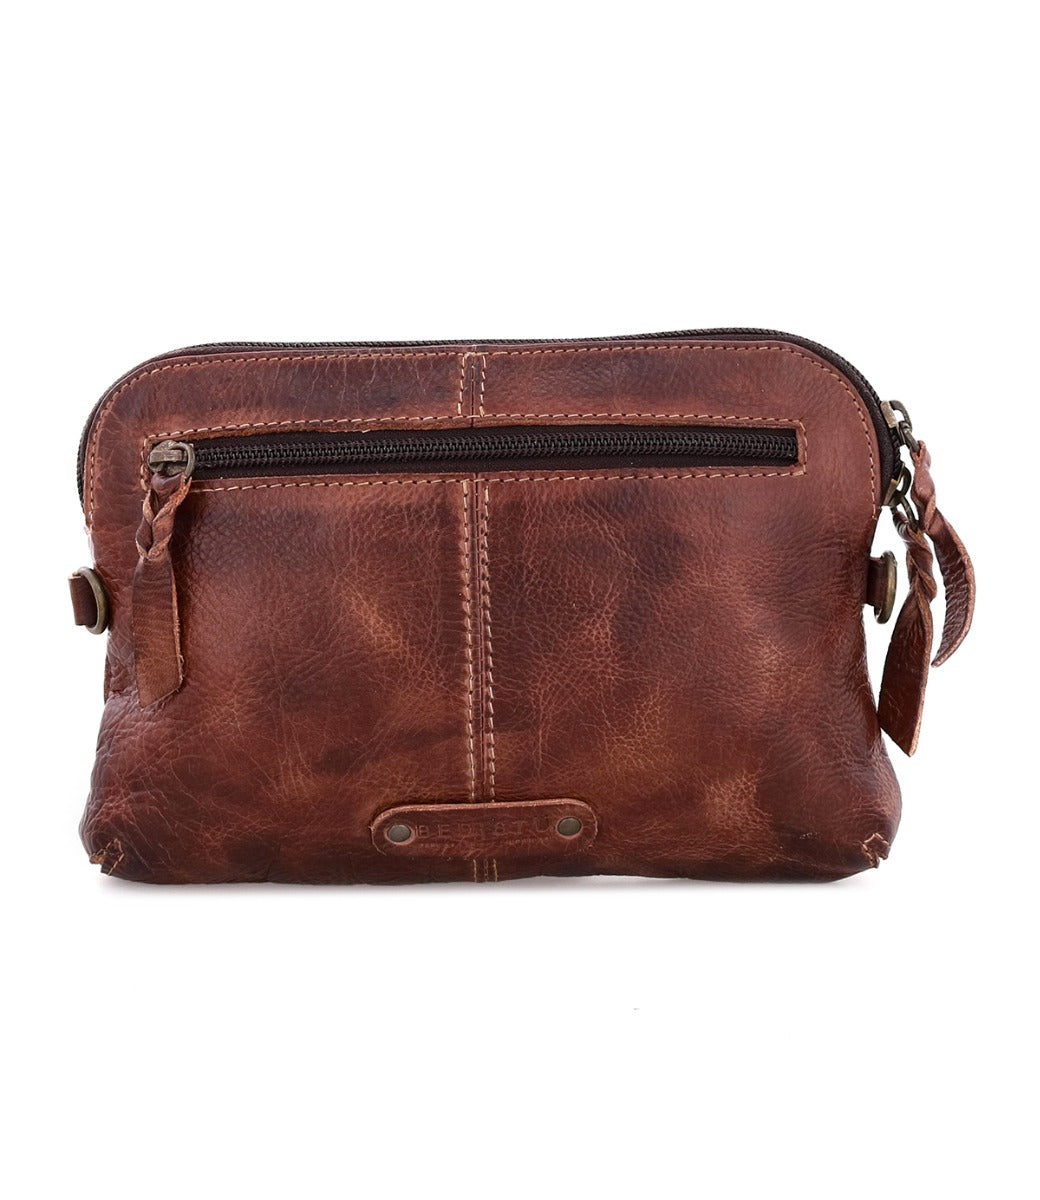 The Bed Stu Magdalene women's brown leather toiletry bag.